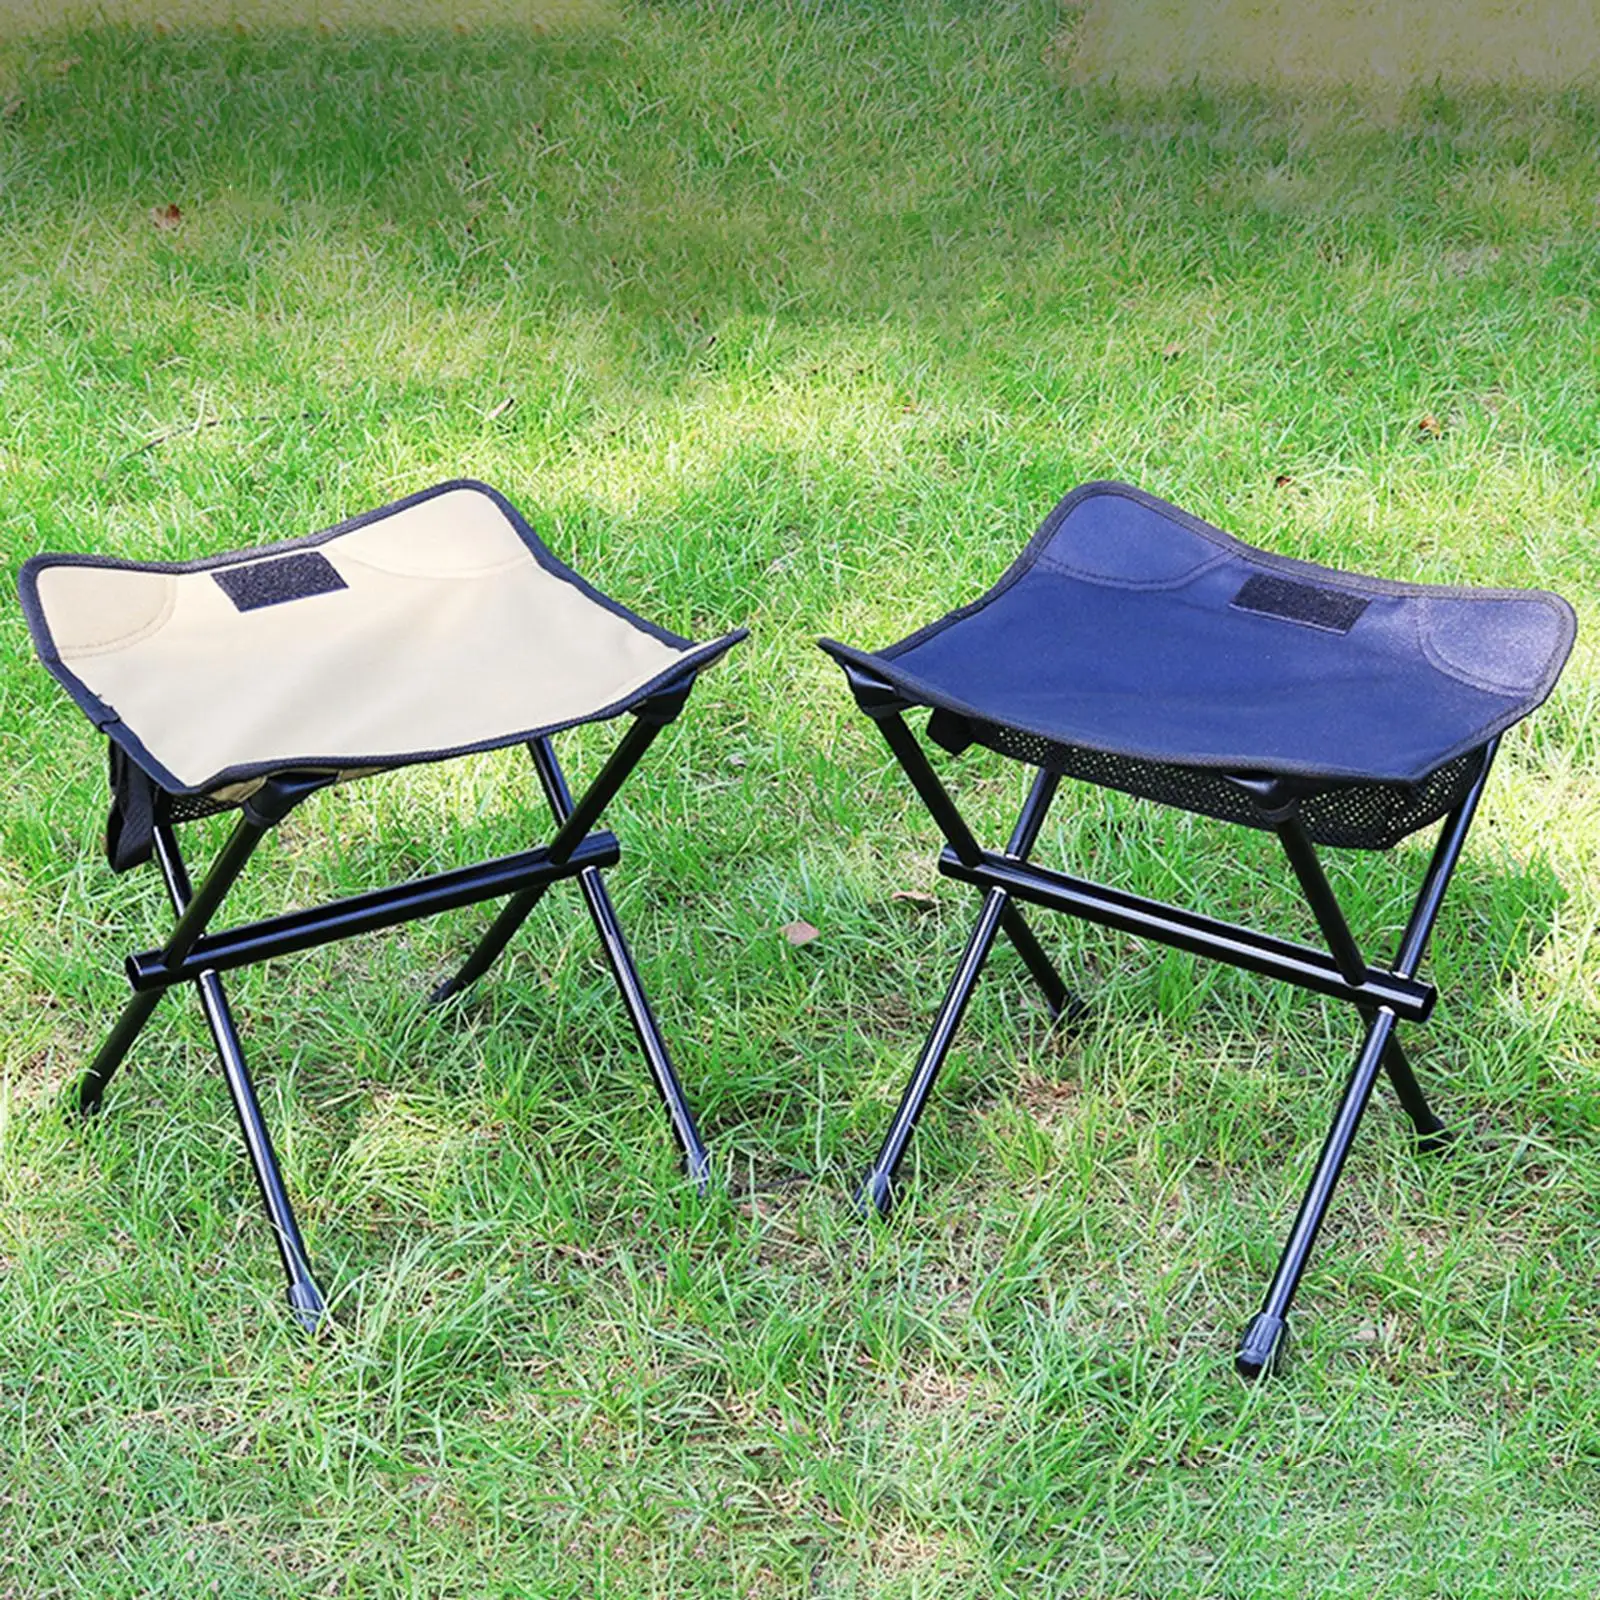 Outdoor Folding Chair Foldable Camping Stool Collapsible Stool Hiking Fishing - £20.22 GBP